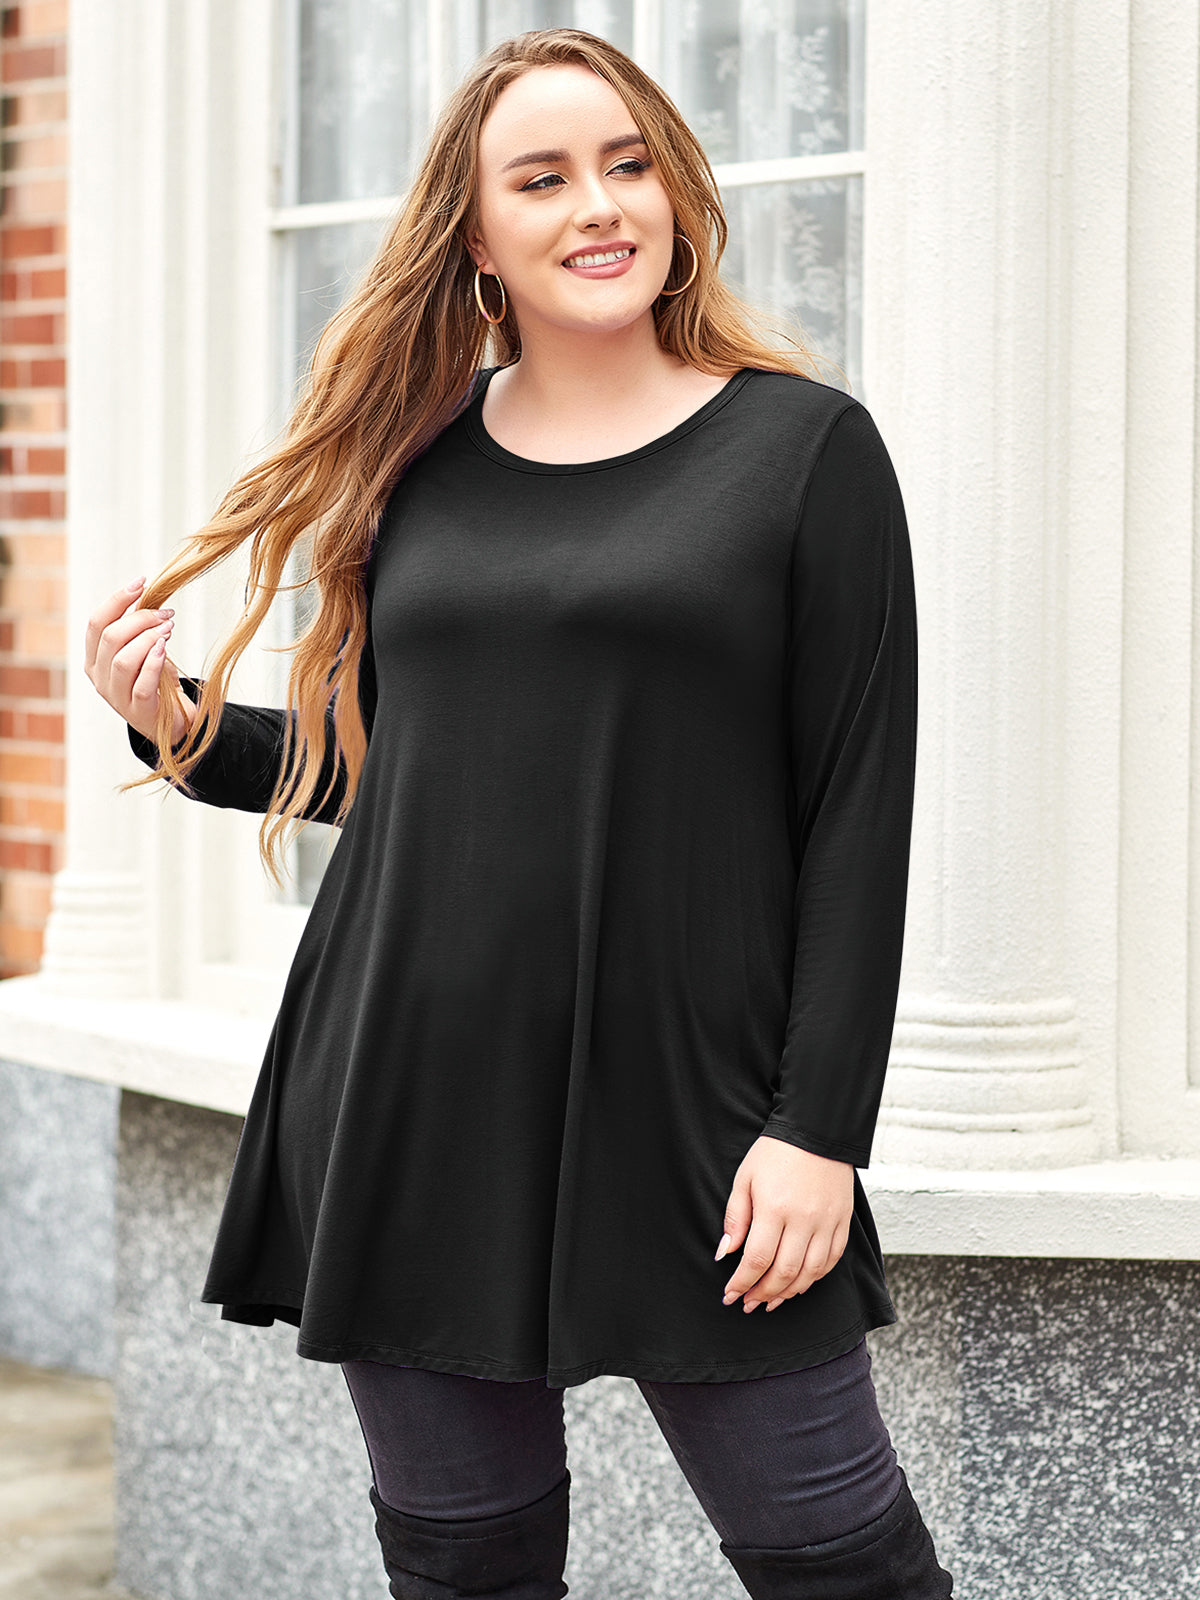 LARACE Plus Size Tunic Tops for Women Long Sleeve Swing Shirt Loose Fit  Flowy Clothing for Leggings 8053 - Black / 1XL